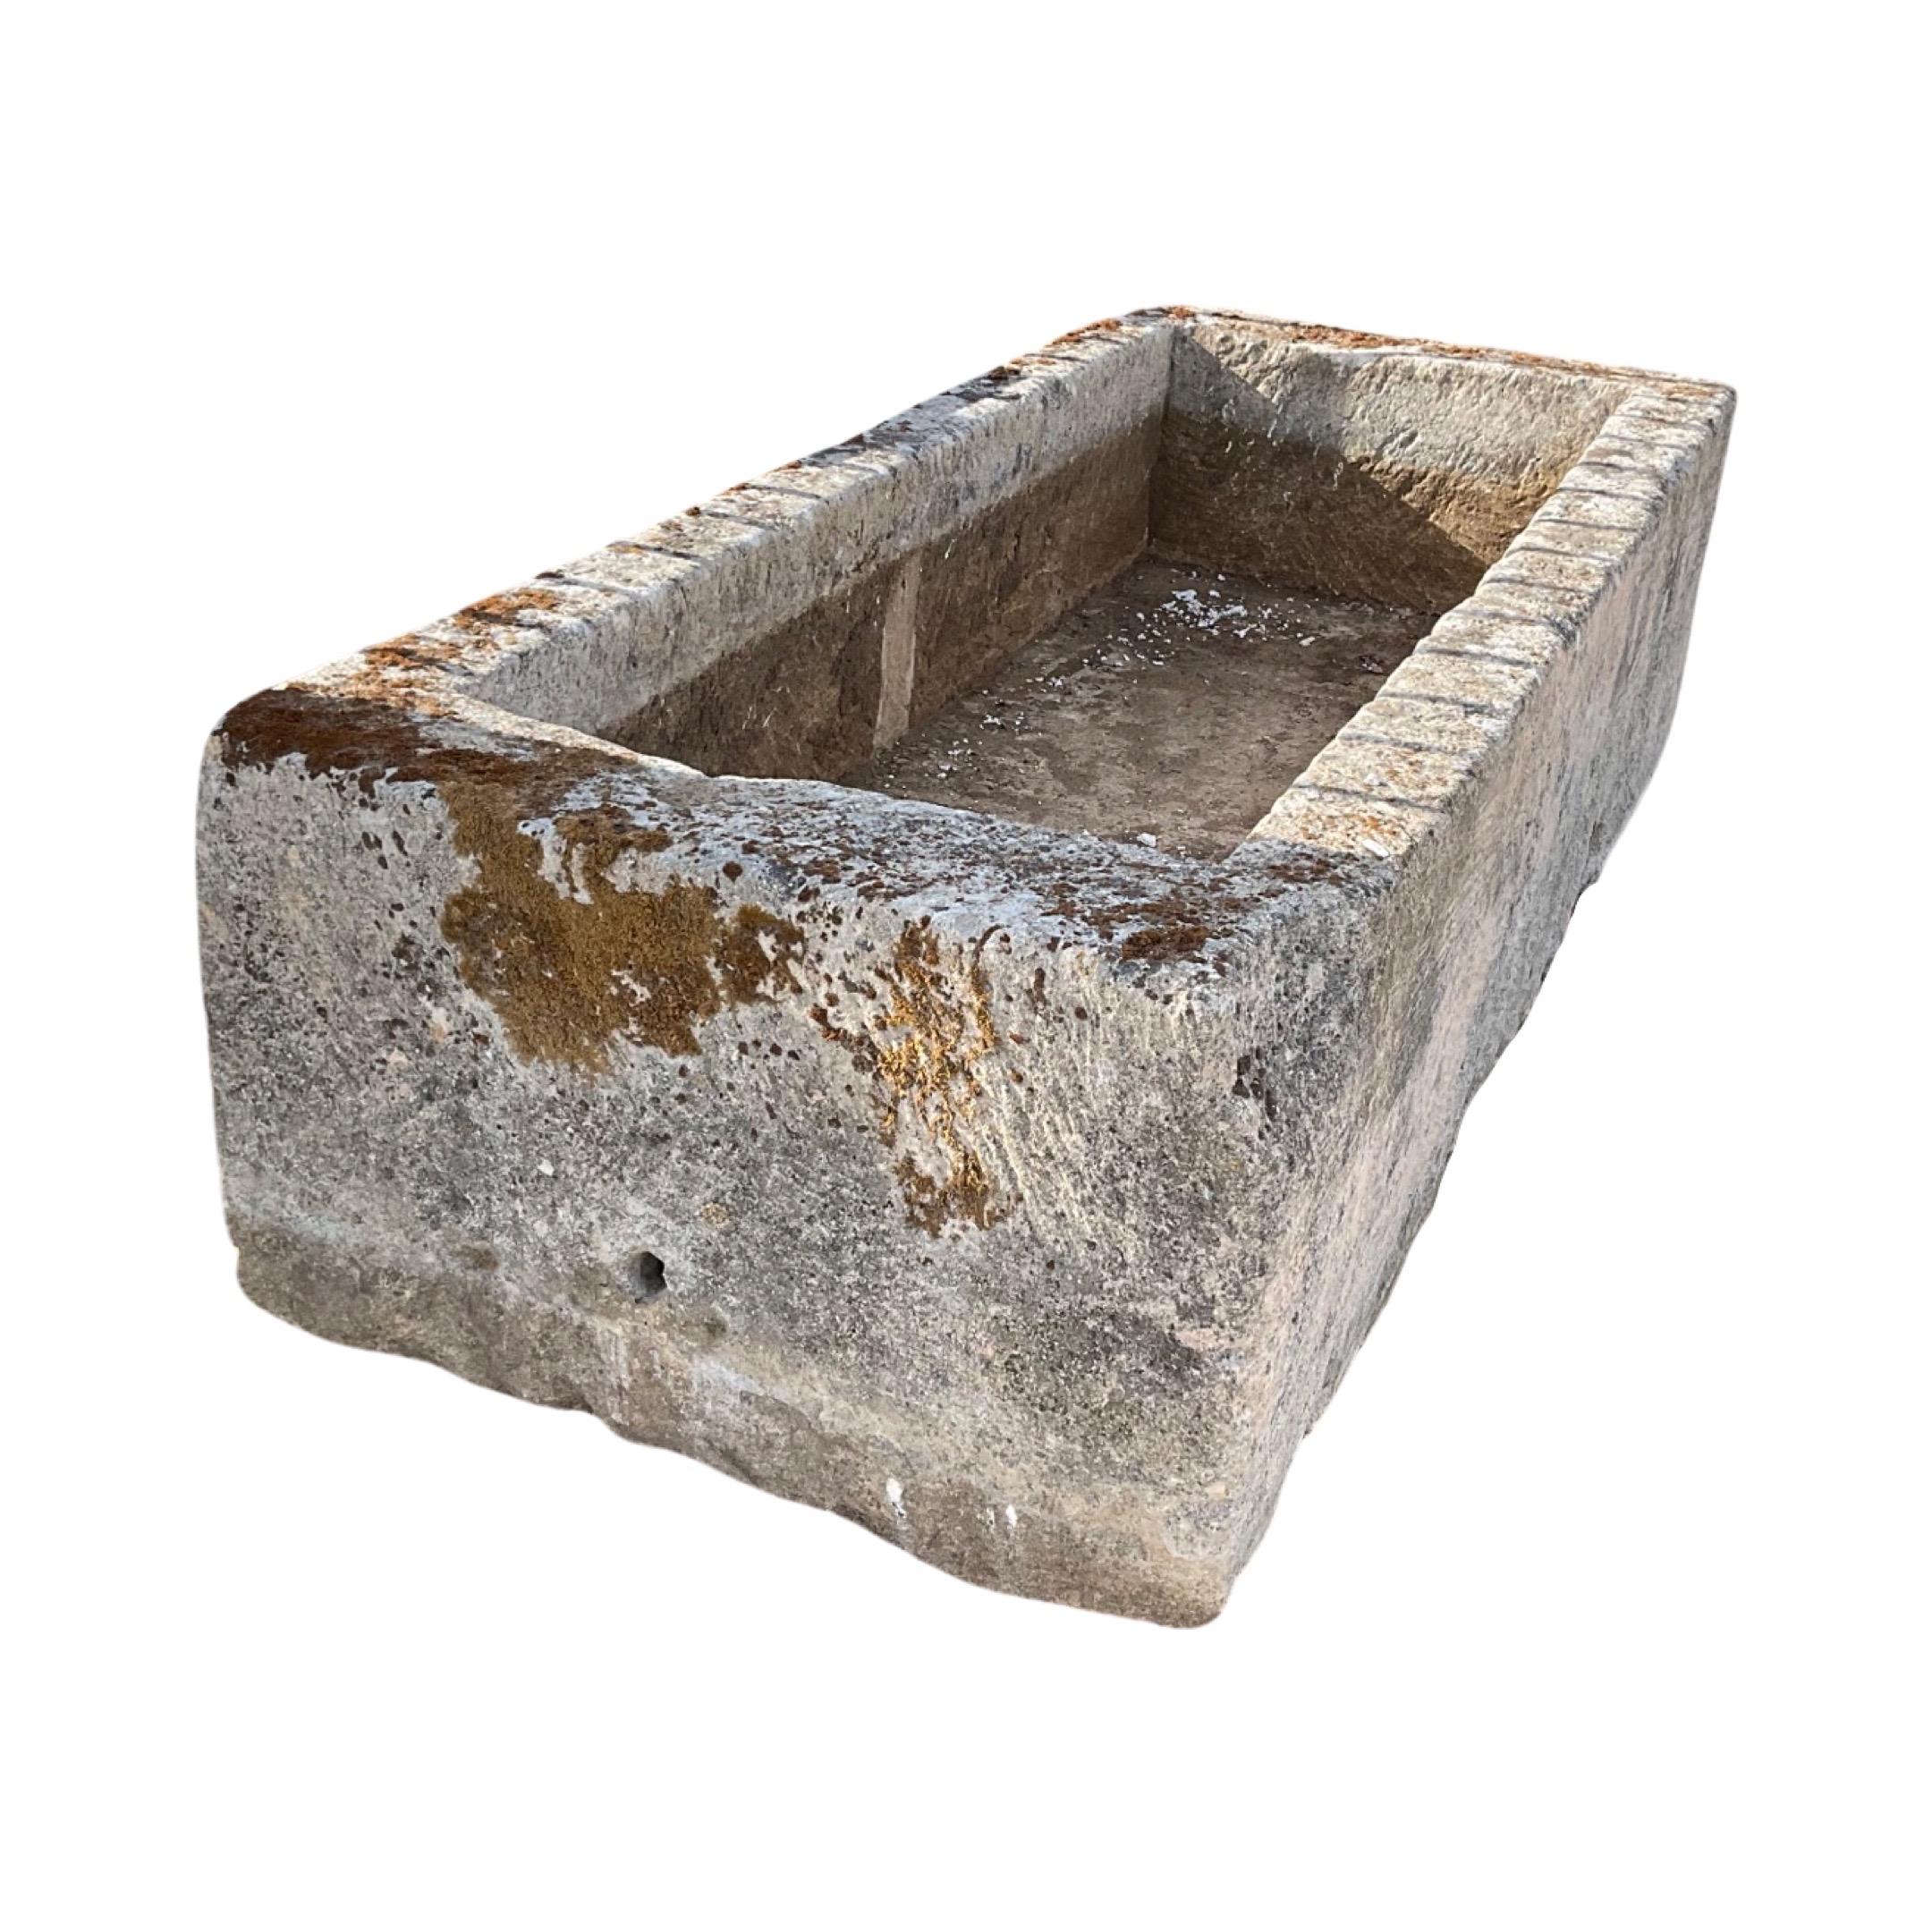 This 17th-century French limestone trough provides an appealing rectangular form and is an ideal choice for outdoor spaces. Its stone construction ensures longevity and a classic aesthetic, granting a special touch of history.